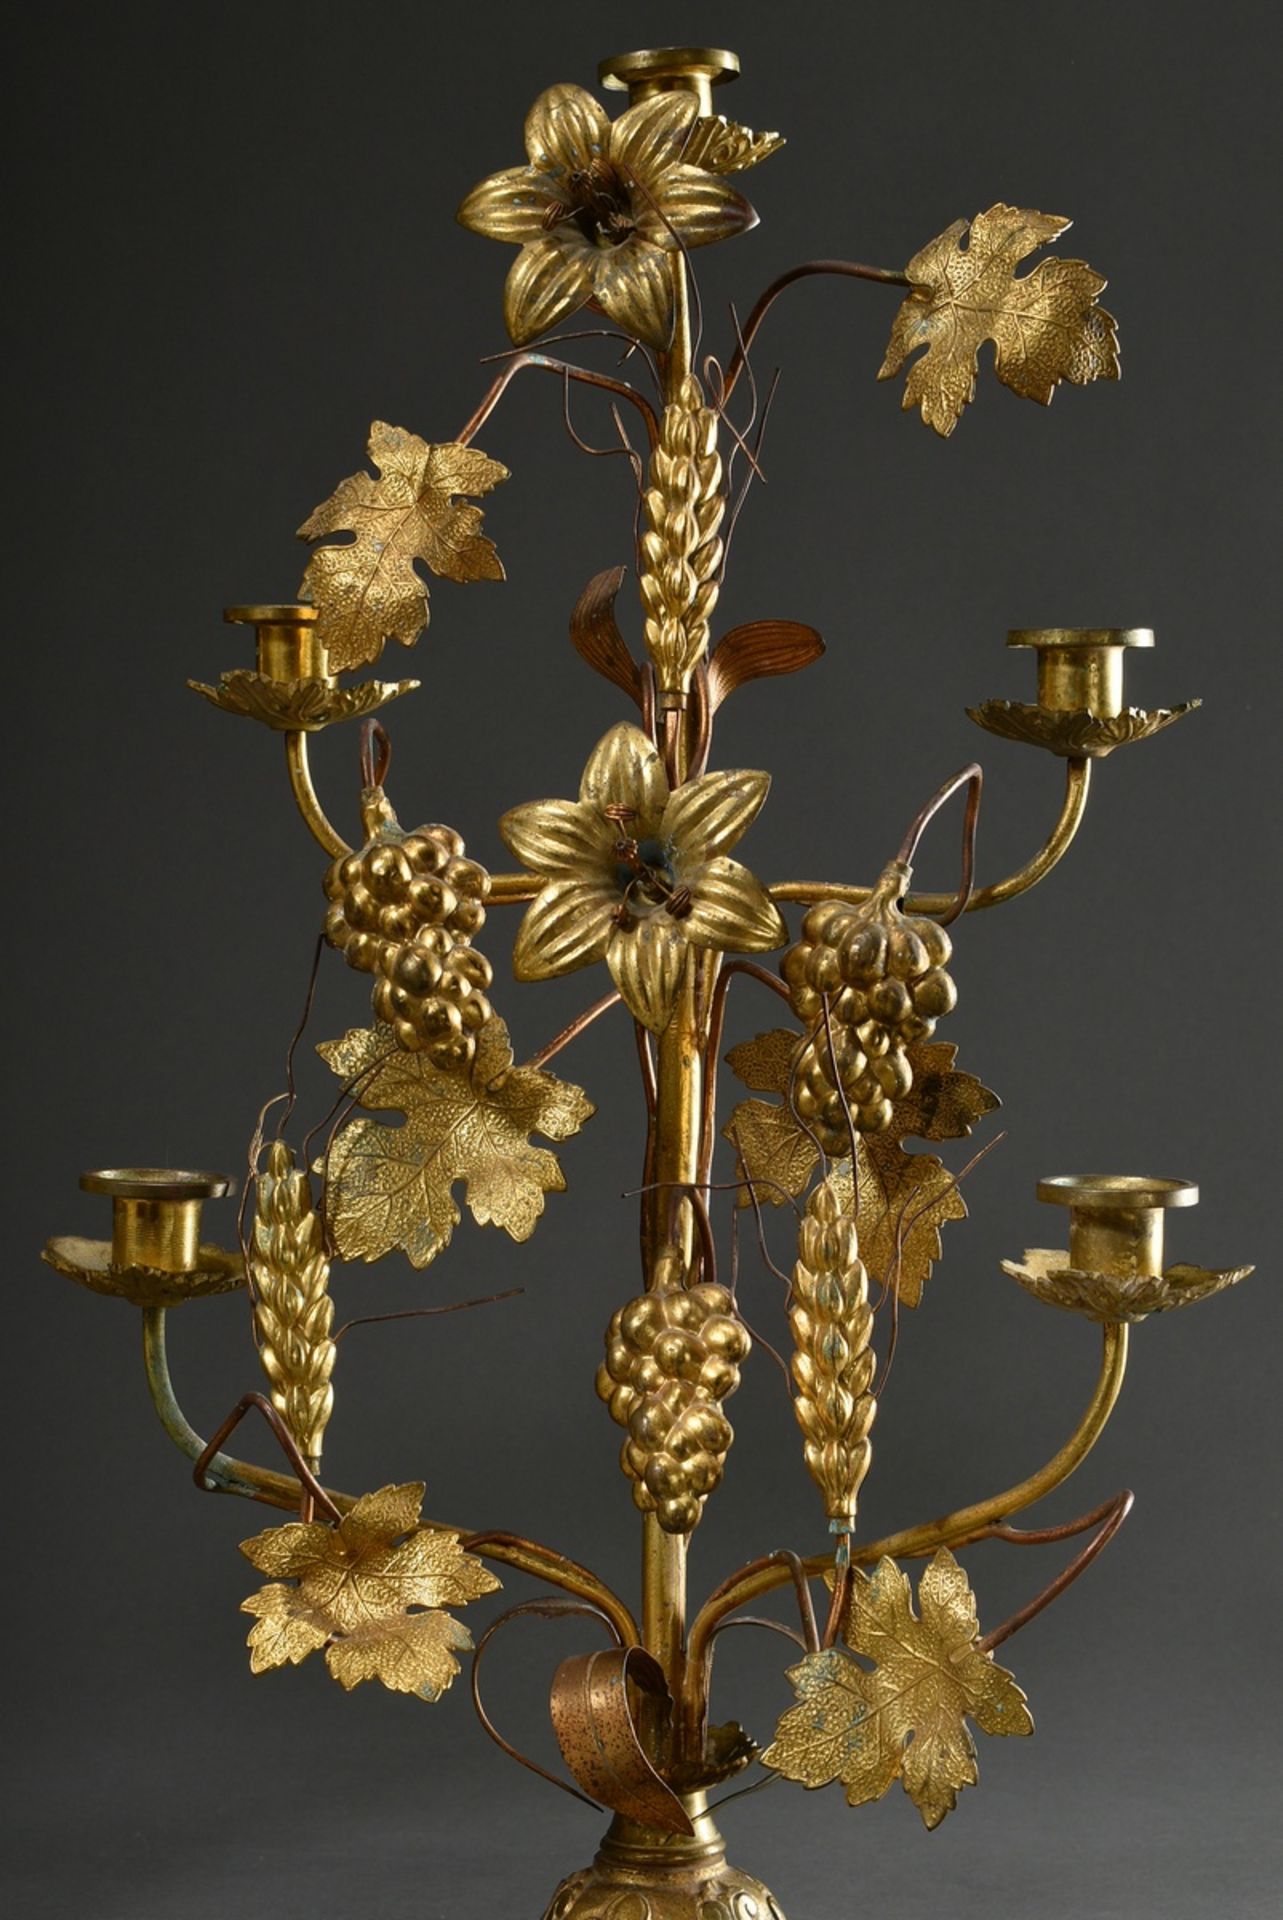 Pair of Marian or altar candlesticks with sculptural lily blossoms, grapes and ears of grain on orn - Image 2 of 6